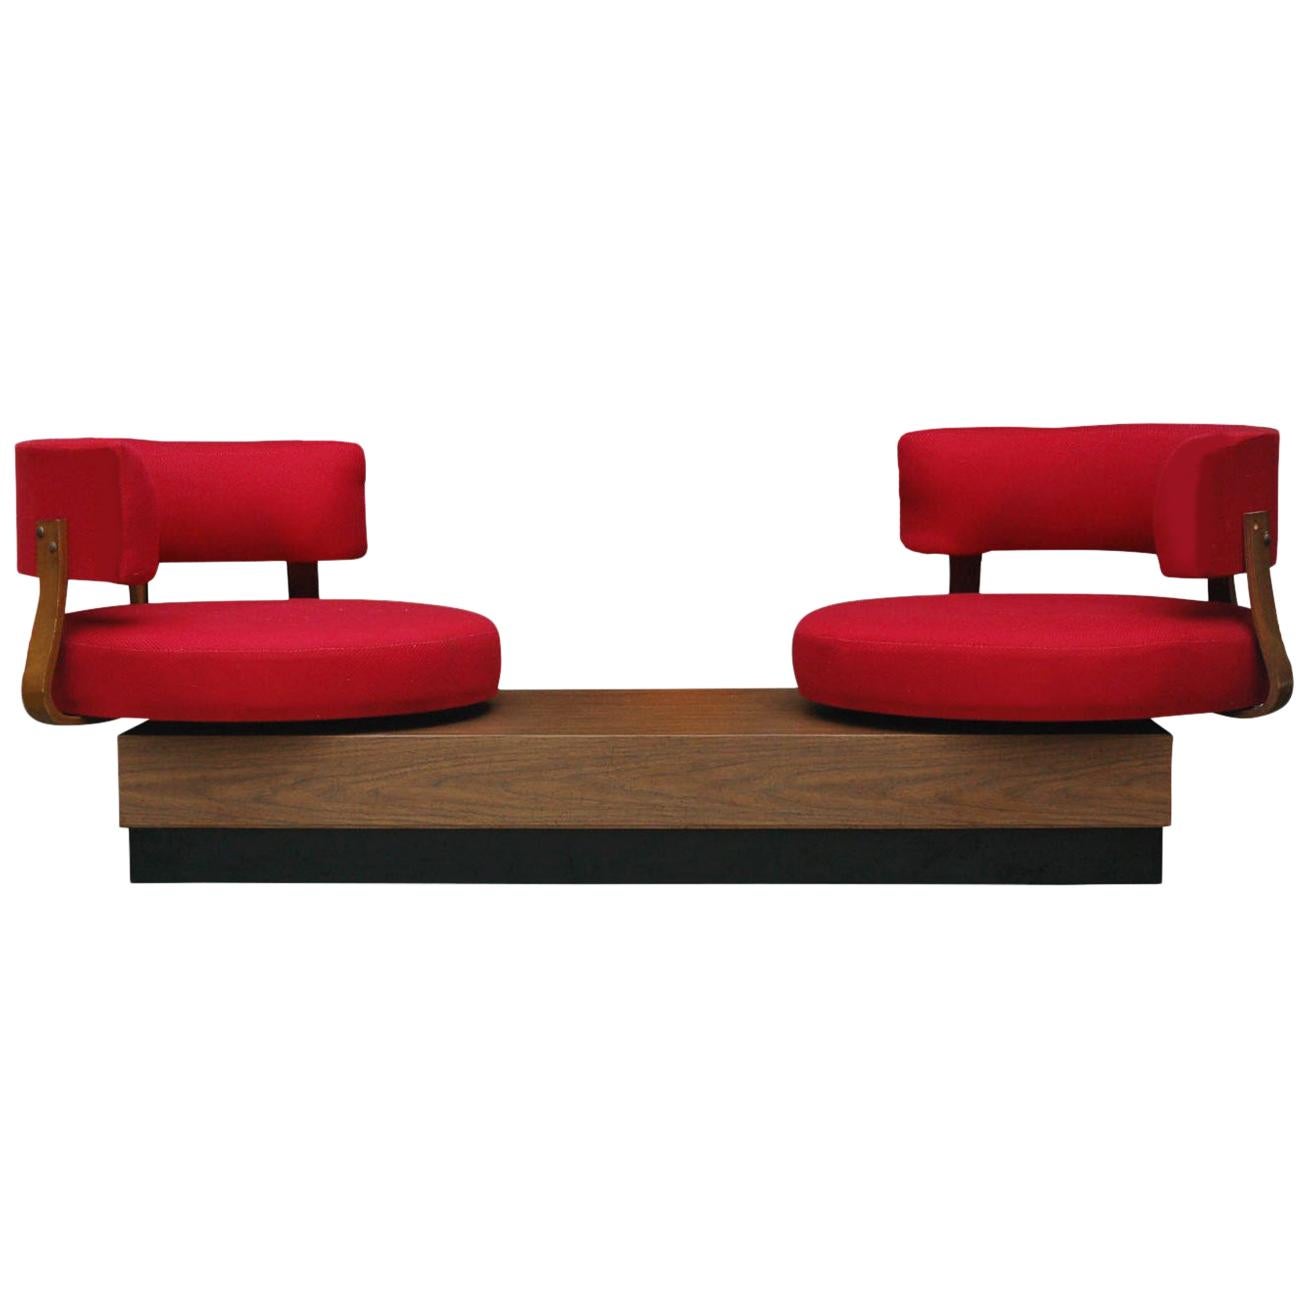 Unique Mid-Century Modern Red Swivel Lounge Chairs Sofa on Platform Base